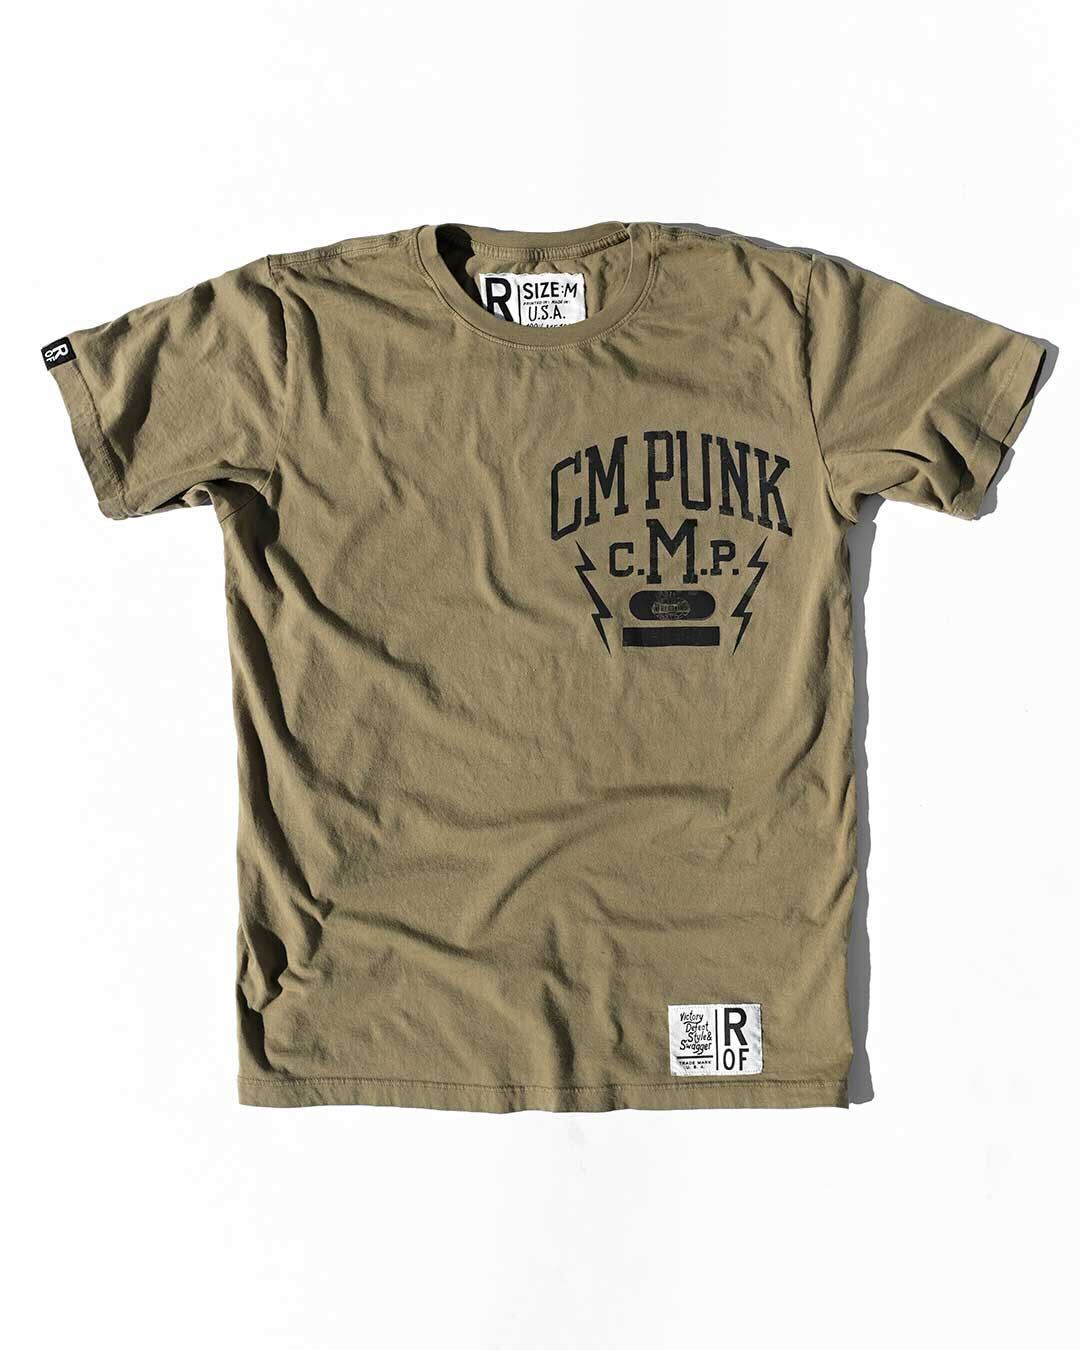 CM Punk Olive Tee - Roots of Fight Canada